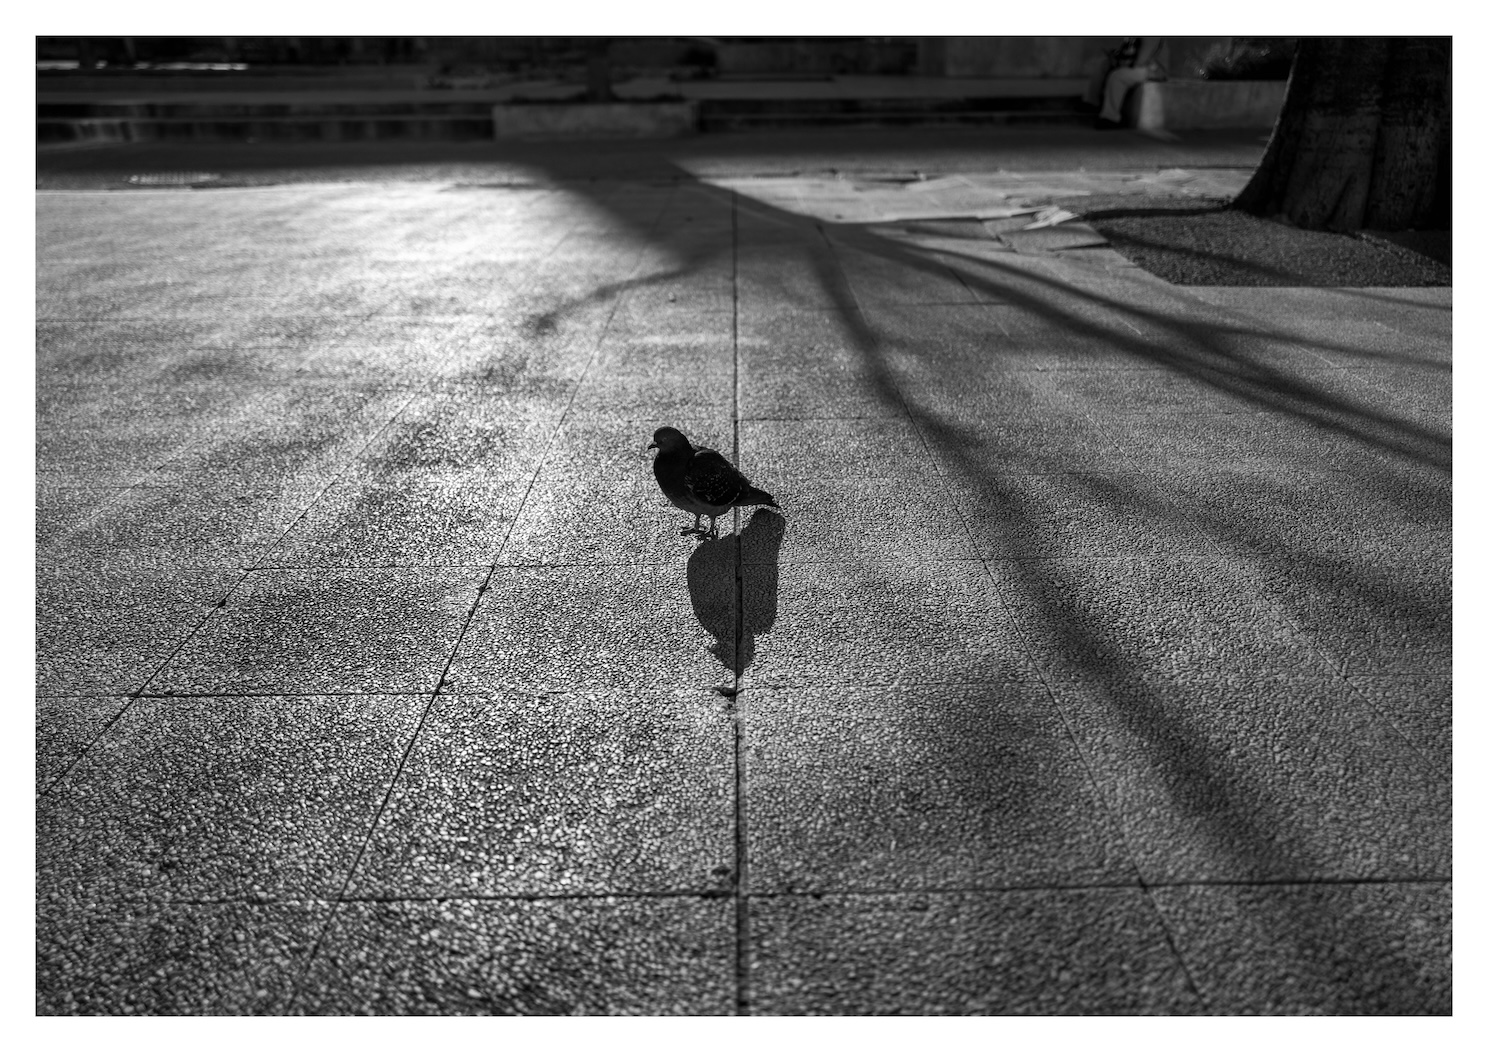 Shadow of pigeon